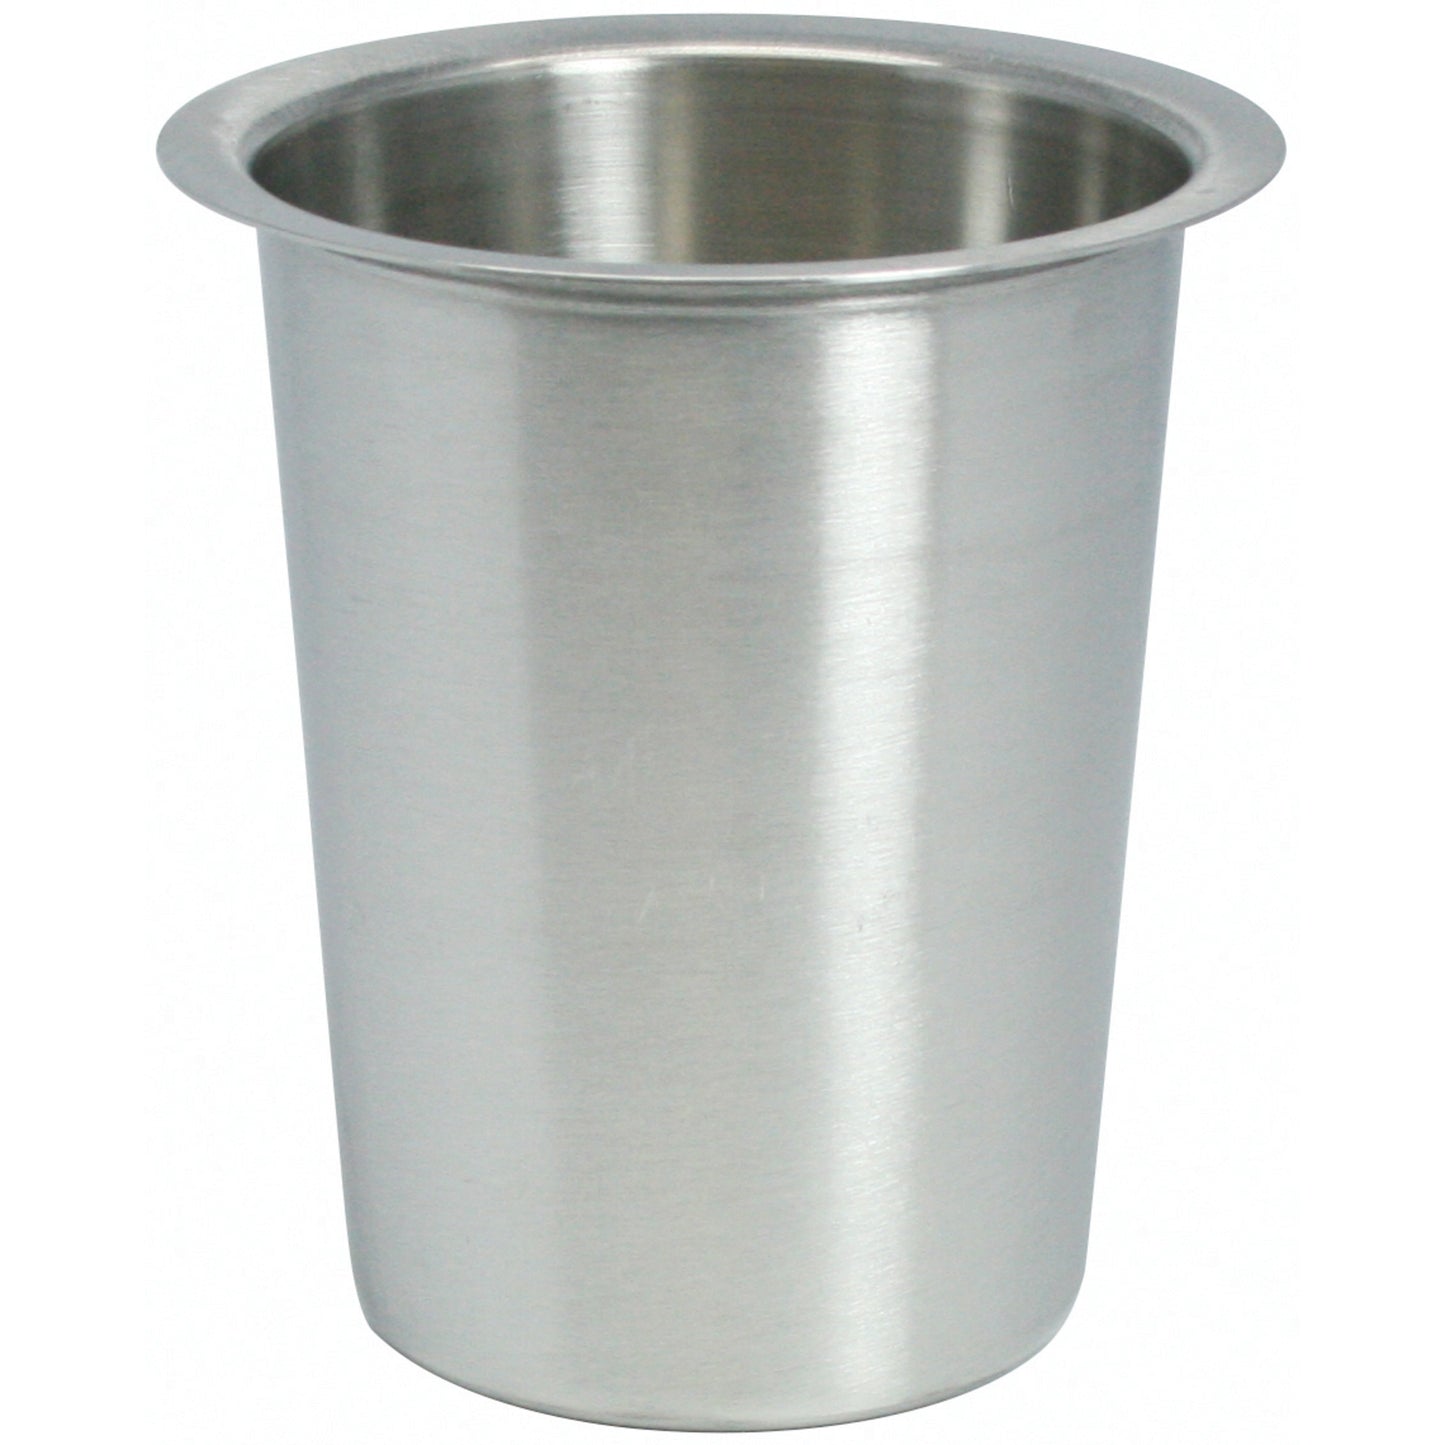 FC-SL - Solid Stainless Steel Flatware Cylinder for FC-4H & FC-6H